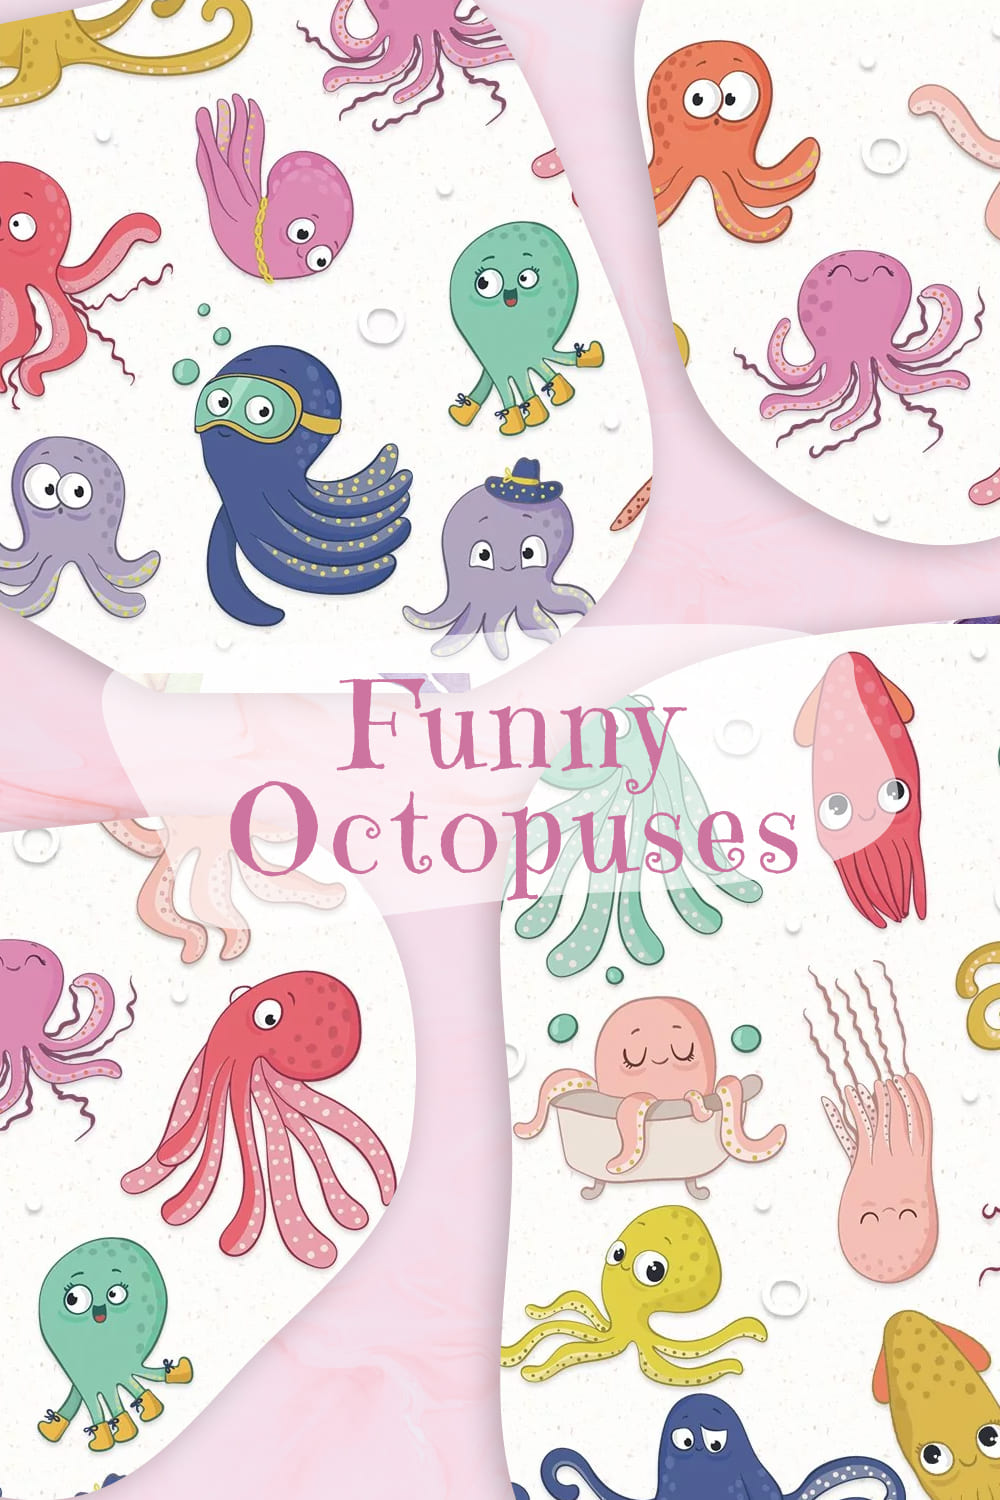 Funny Octopuses pinterest image.